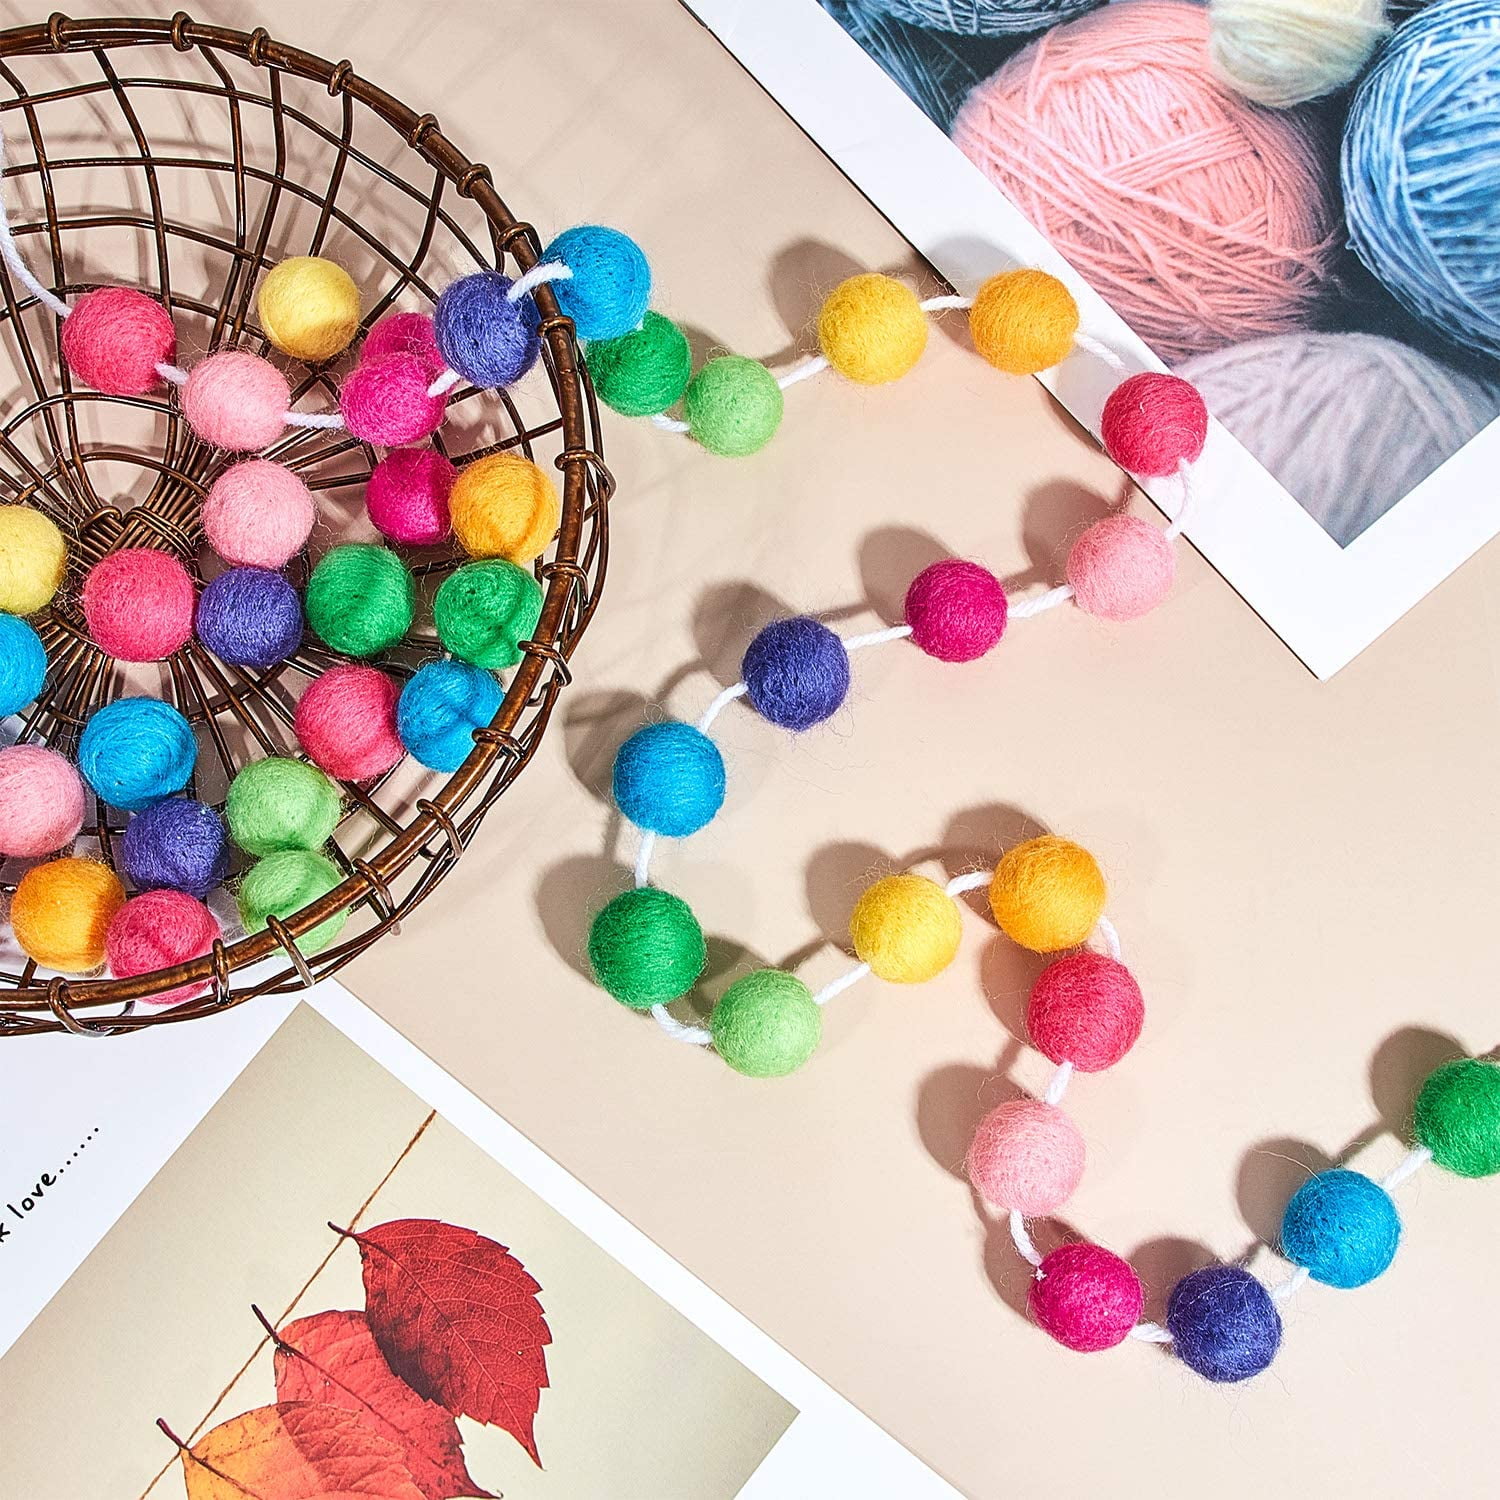  2.5 cm handmade felt balls - Wholesale Bulk Quantity: 50 -  Easter Colors: Yellow, Fuchsia, Lime, Lavender - 100% Wool Poms for Crafts,  Garland Making, Pastel Mantel Banner, Spring Color Scheme : Handmade  Products